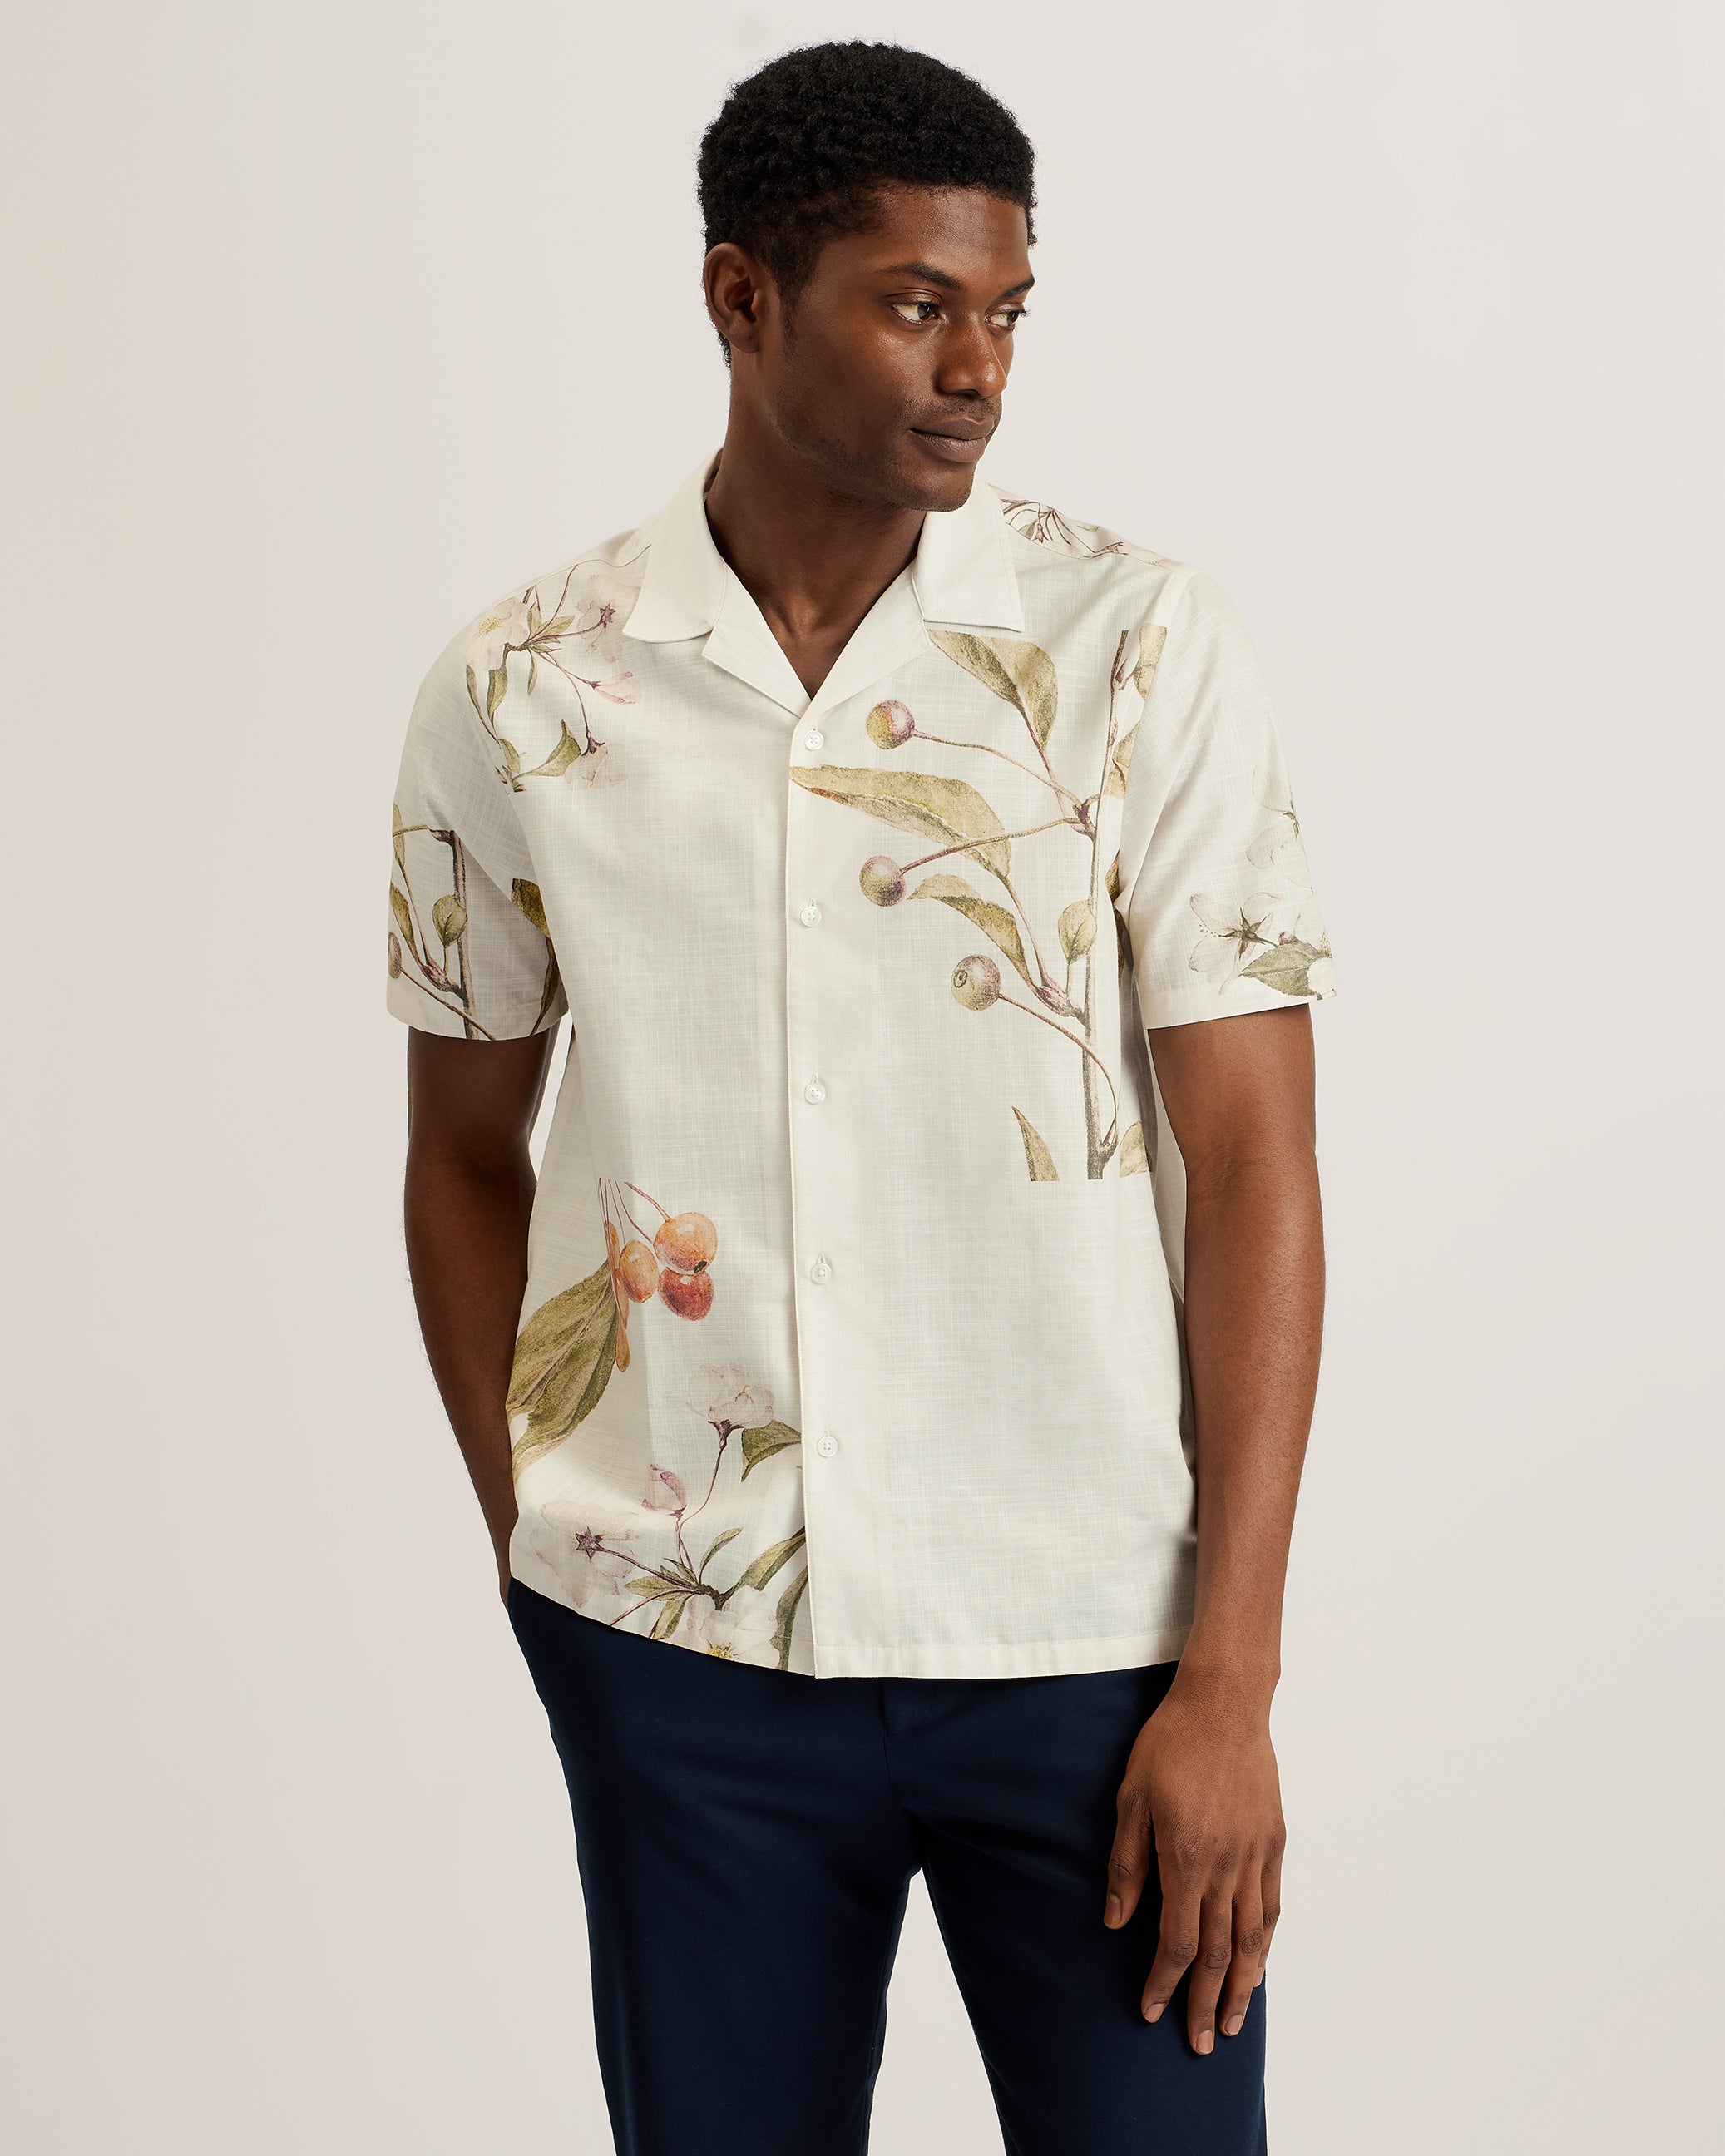 Men's Tops & Polos – Ted Baker, Canada